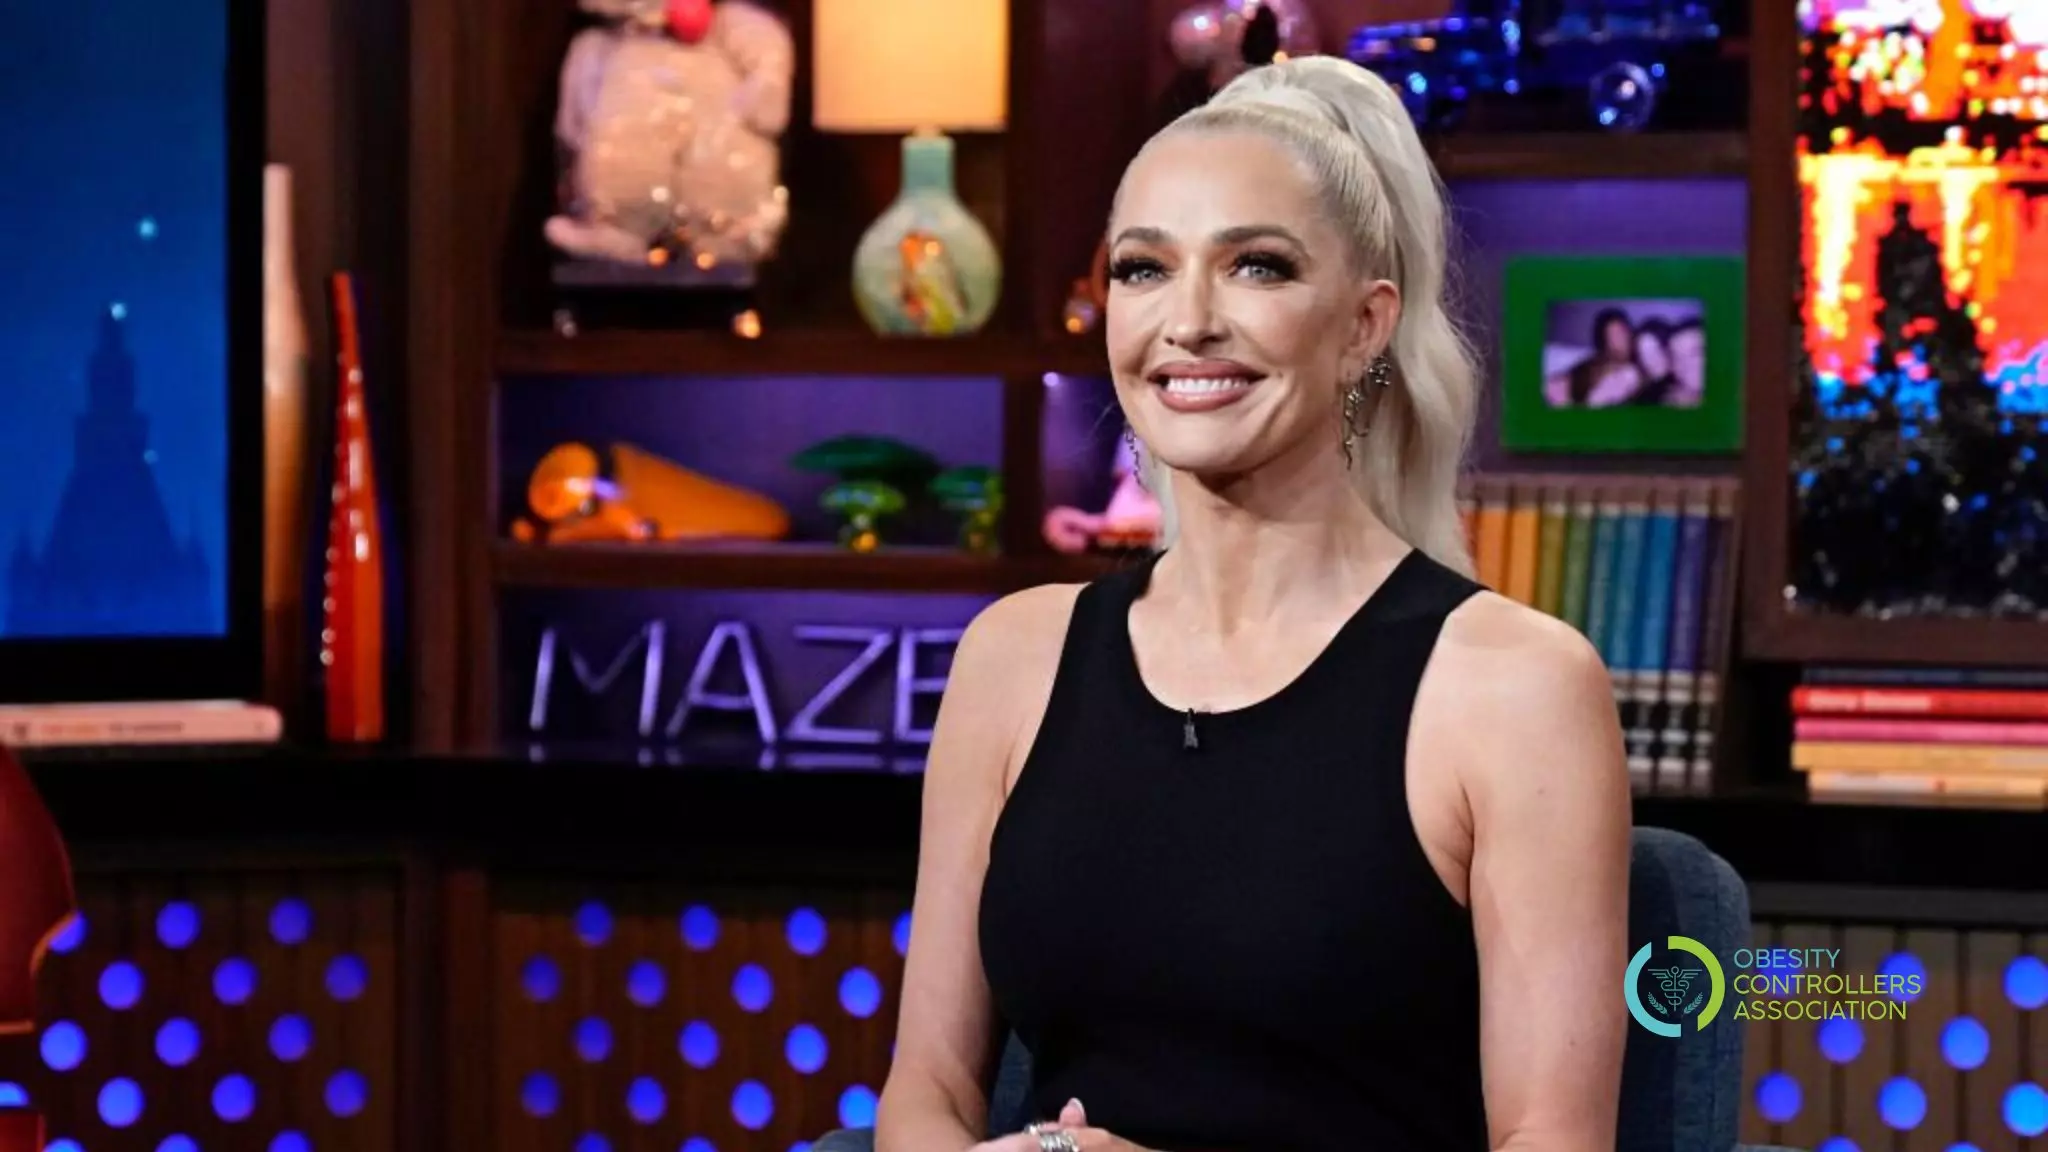 Erika Jayne's Diet And Workouts